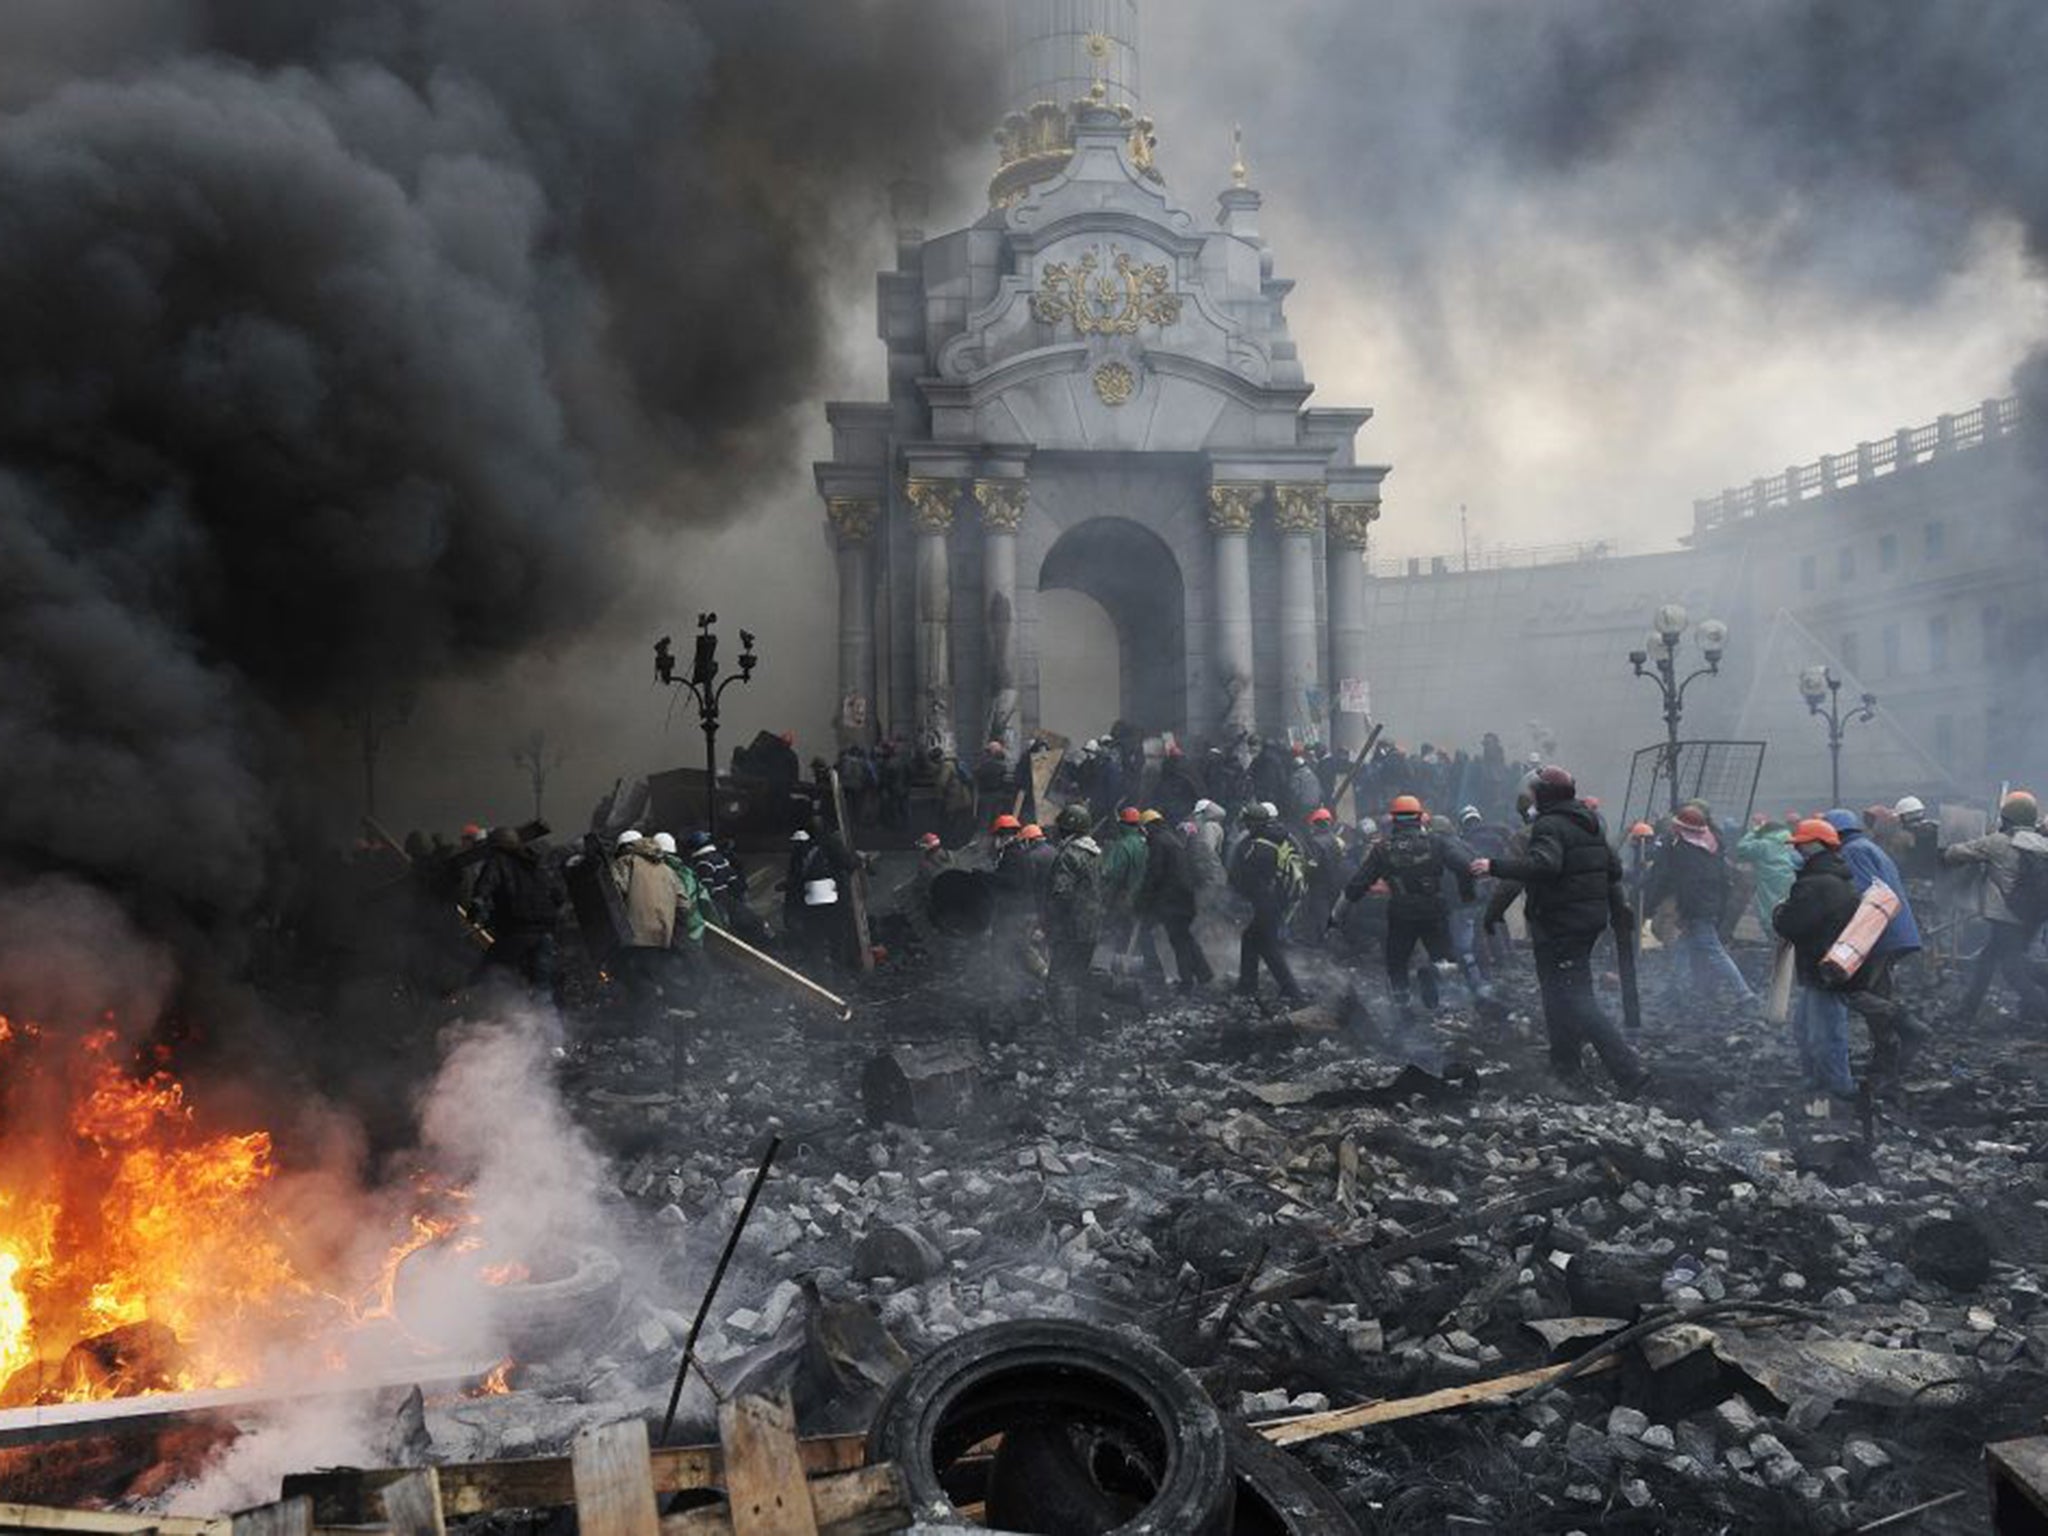 Kiev 2014: Today’s battles tend to be messy internal conflicts making US intervention more complex